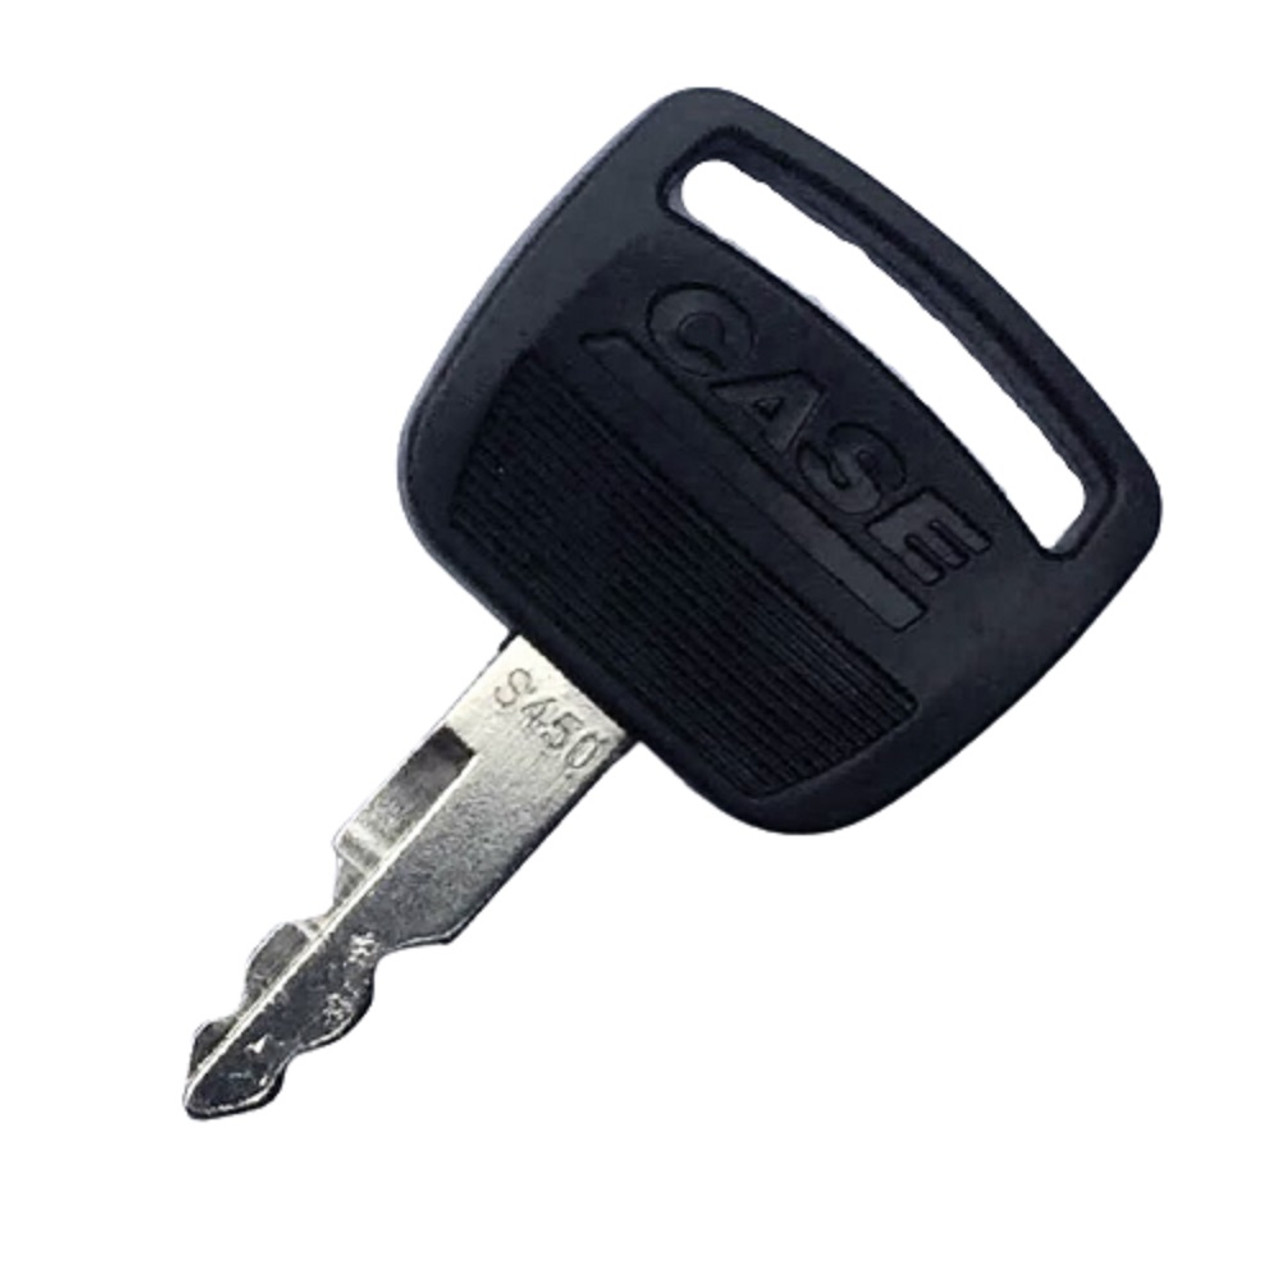 Case Ignition Key KHR20070 fits 90 series and CX series Excavators